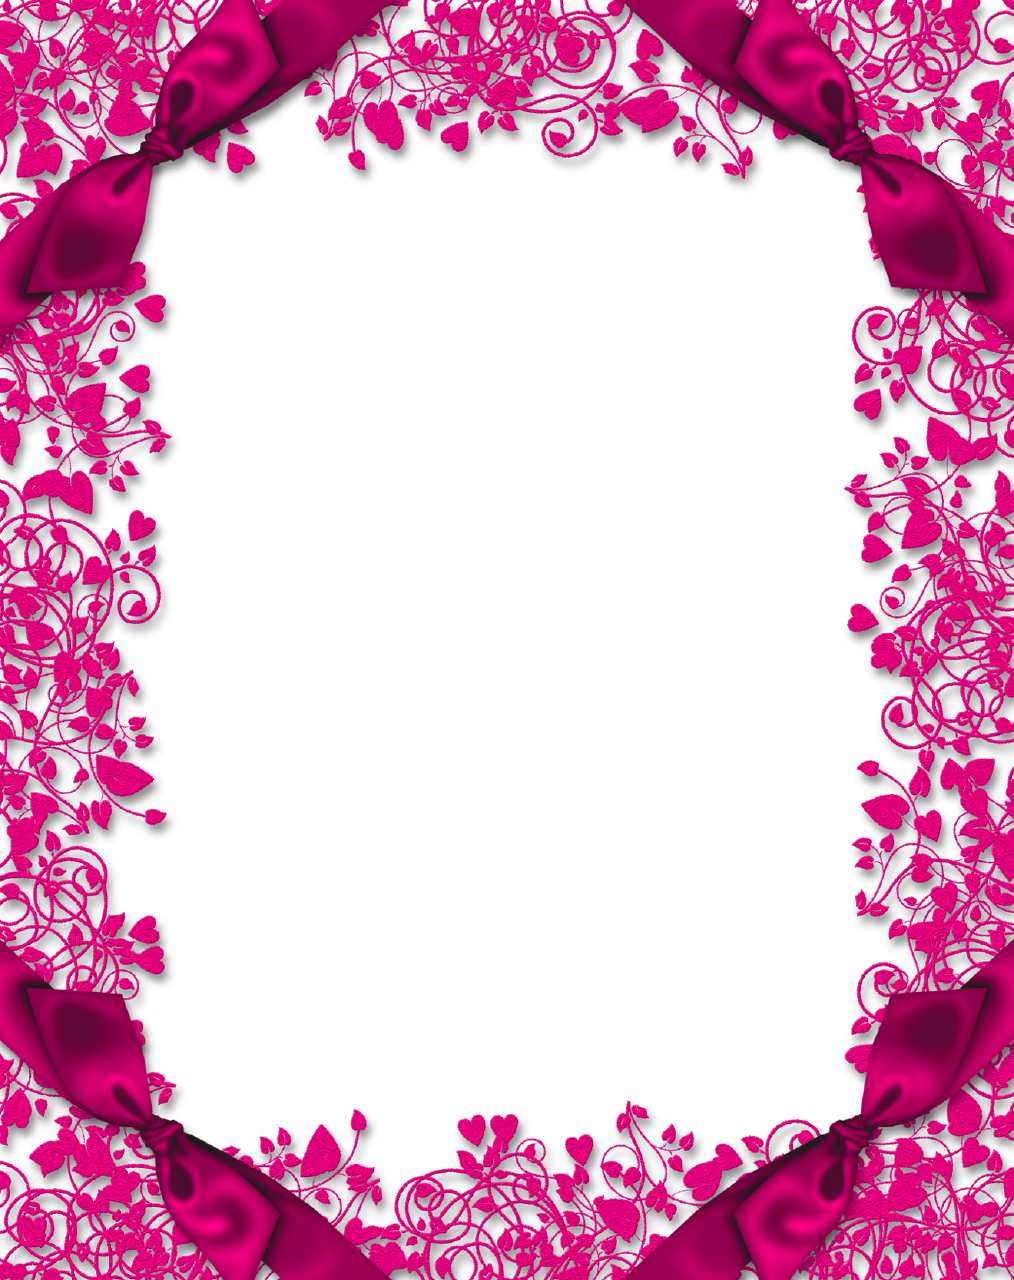 Pink Floral Border PNG High-Quality Image